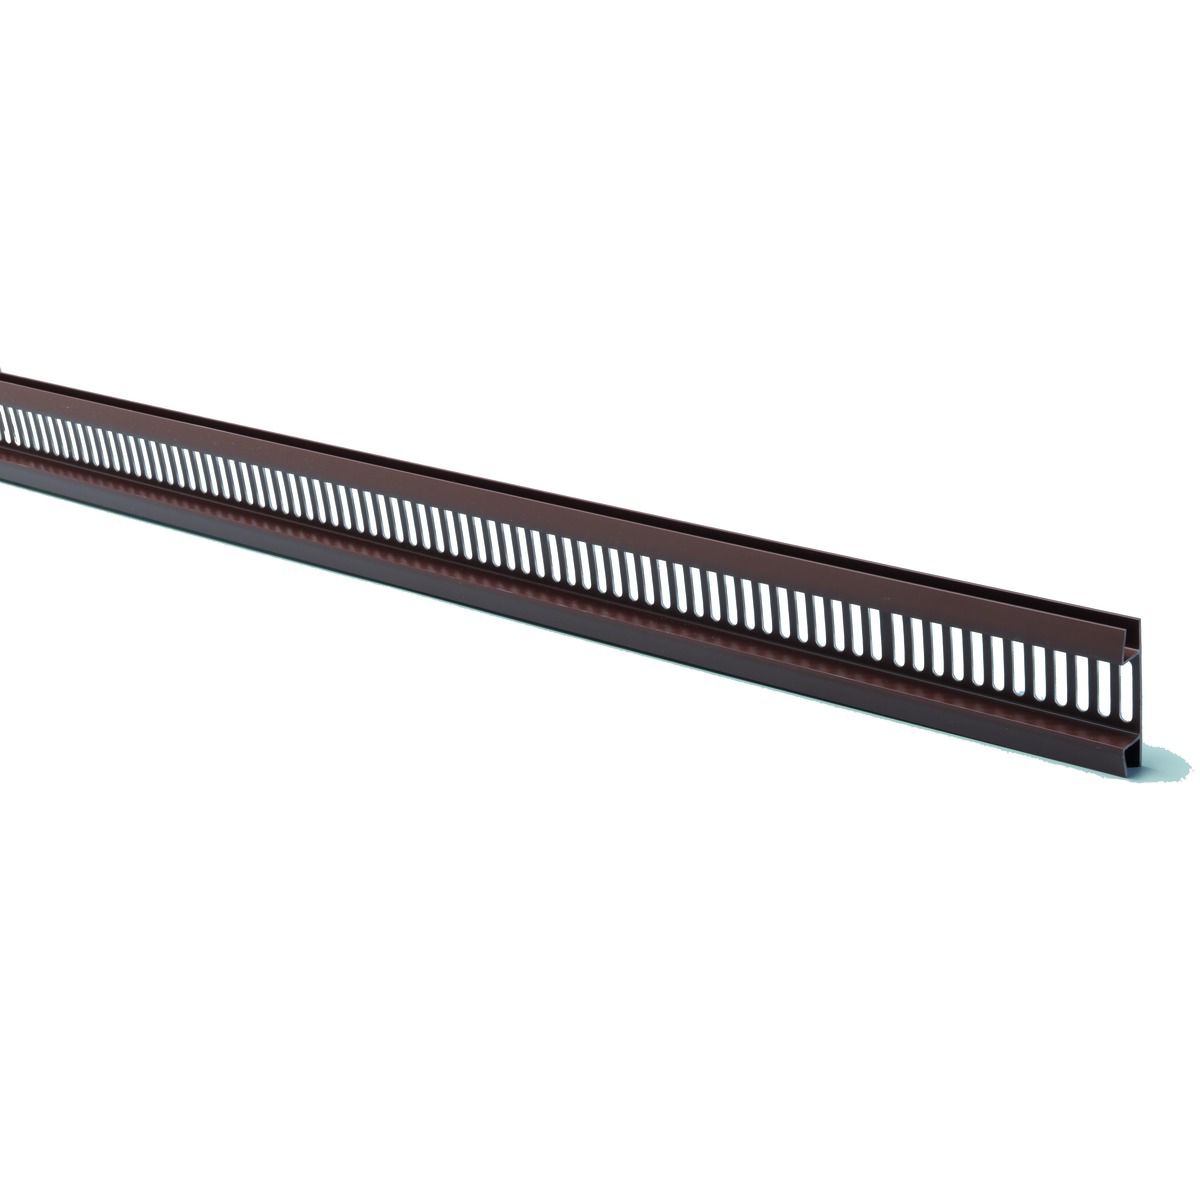 Image of Wickes PVCu Rosewood Ventilated Soffit Strip 2500mm